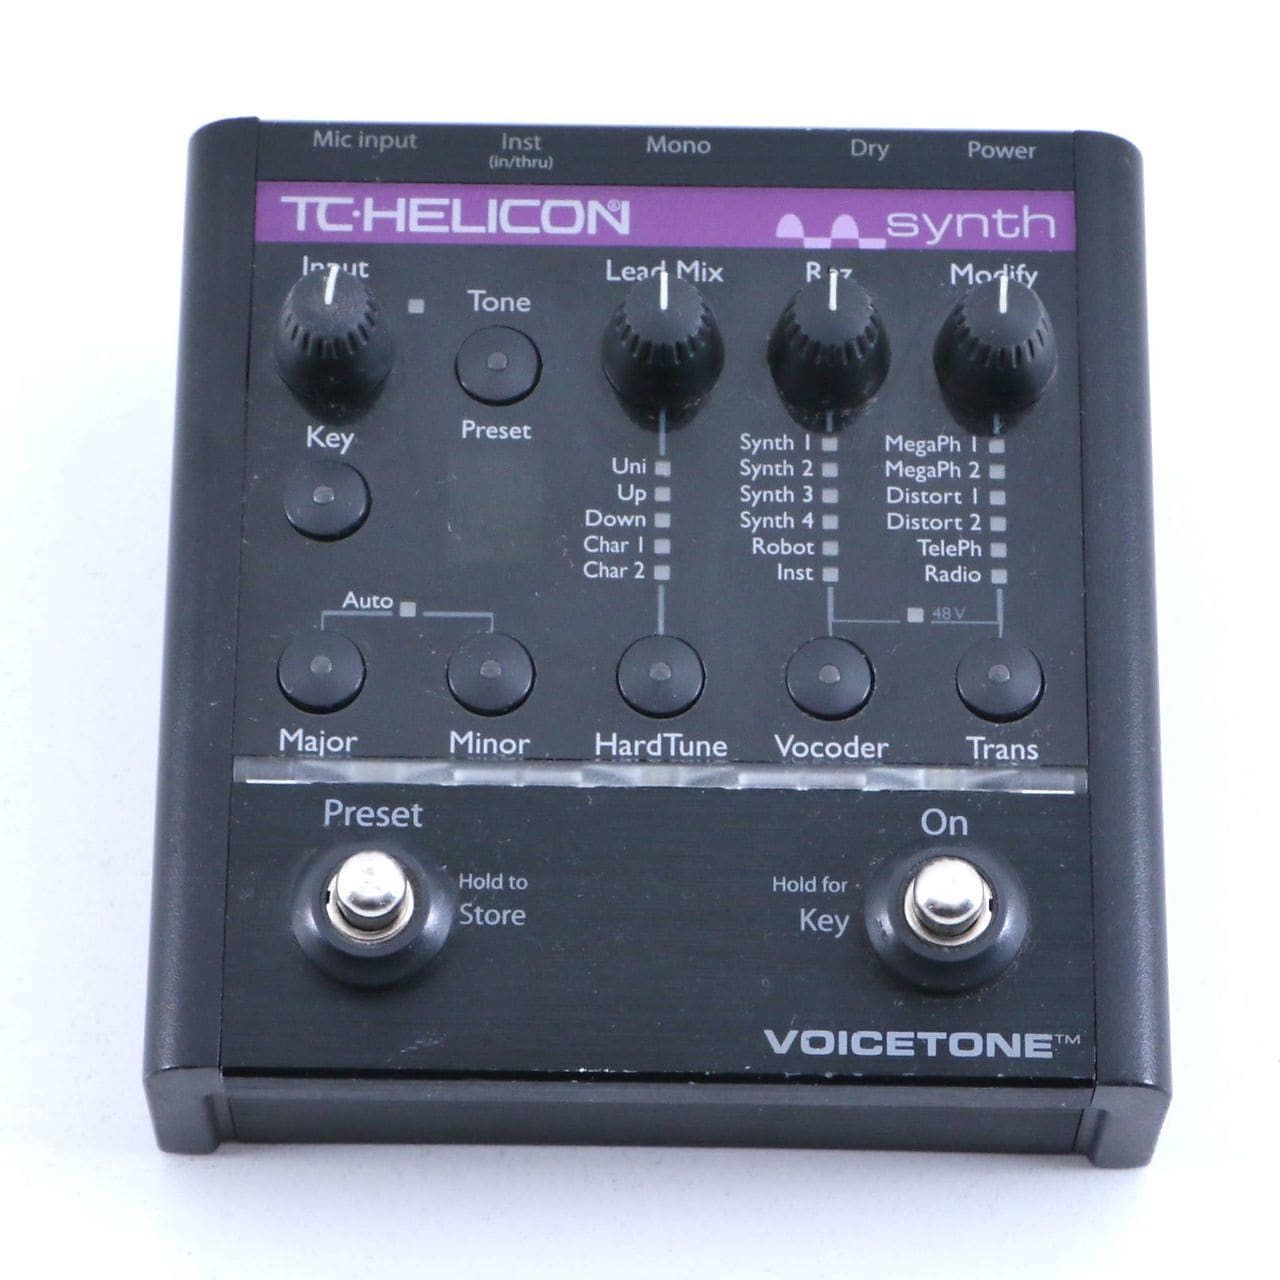 TC-Helicon VoiceTone synth-